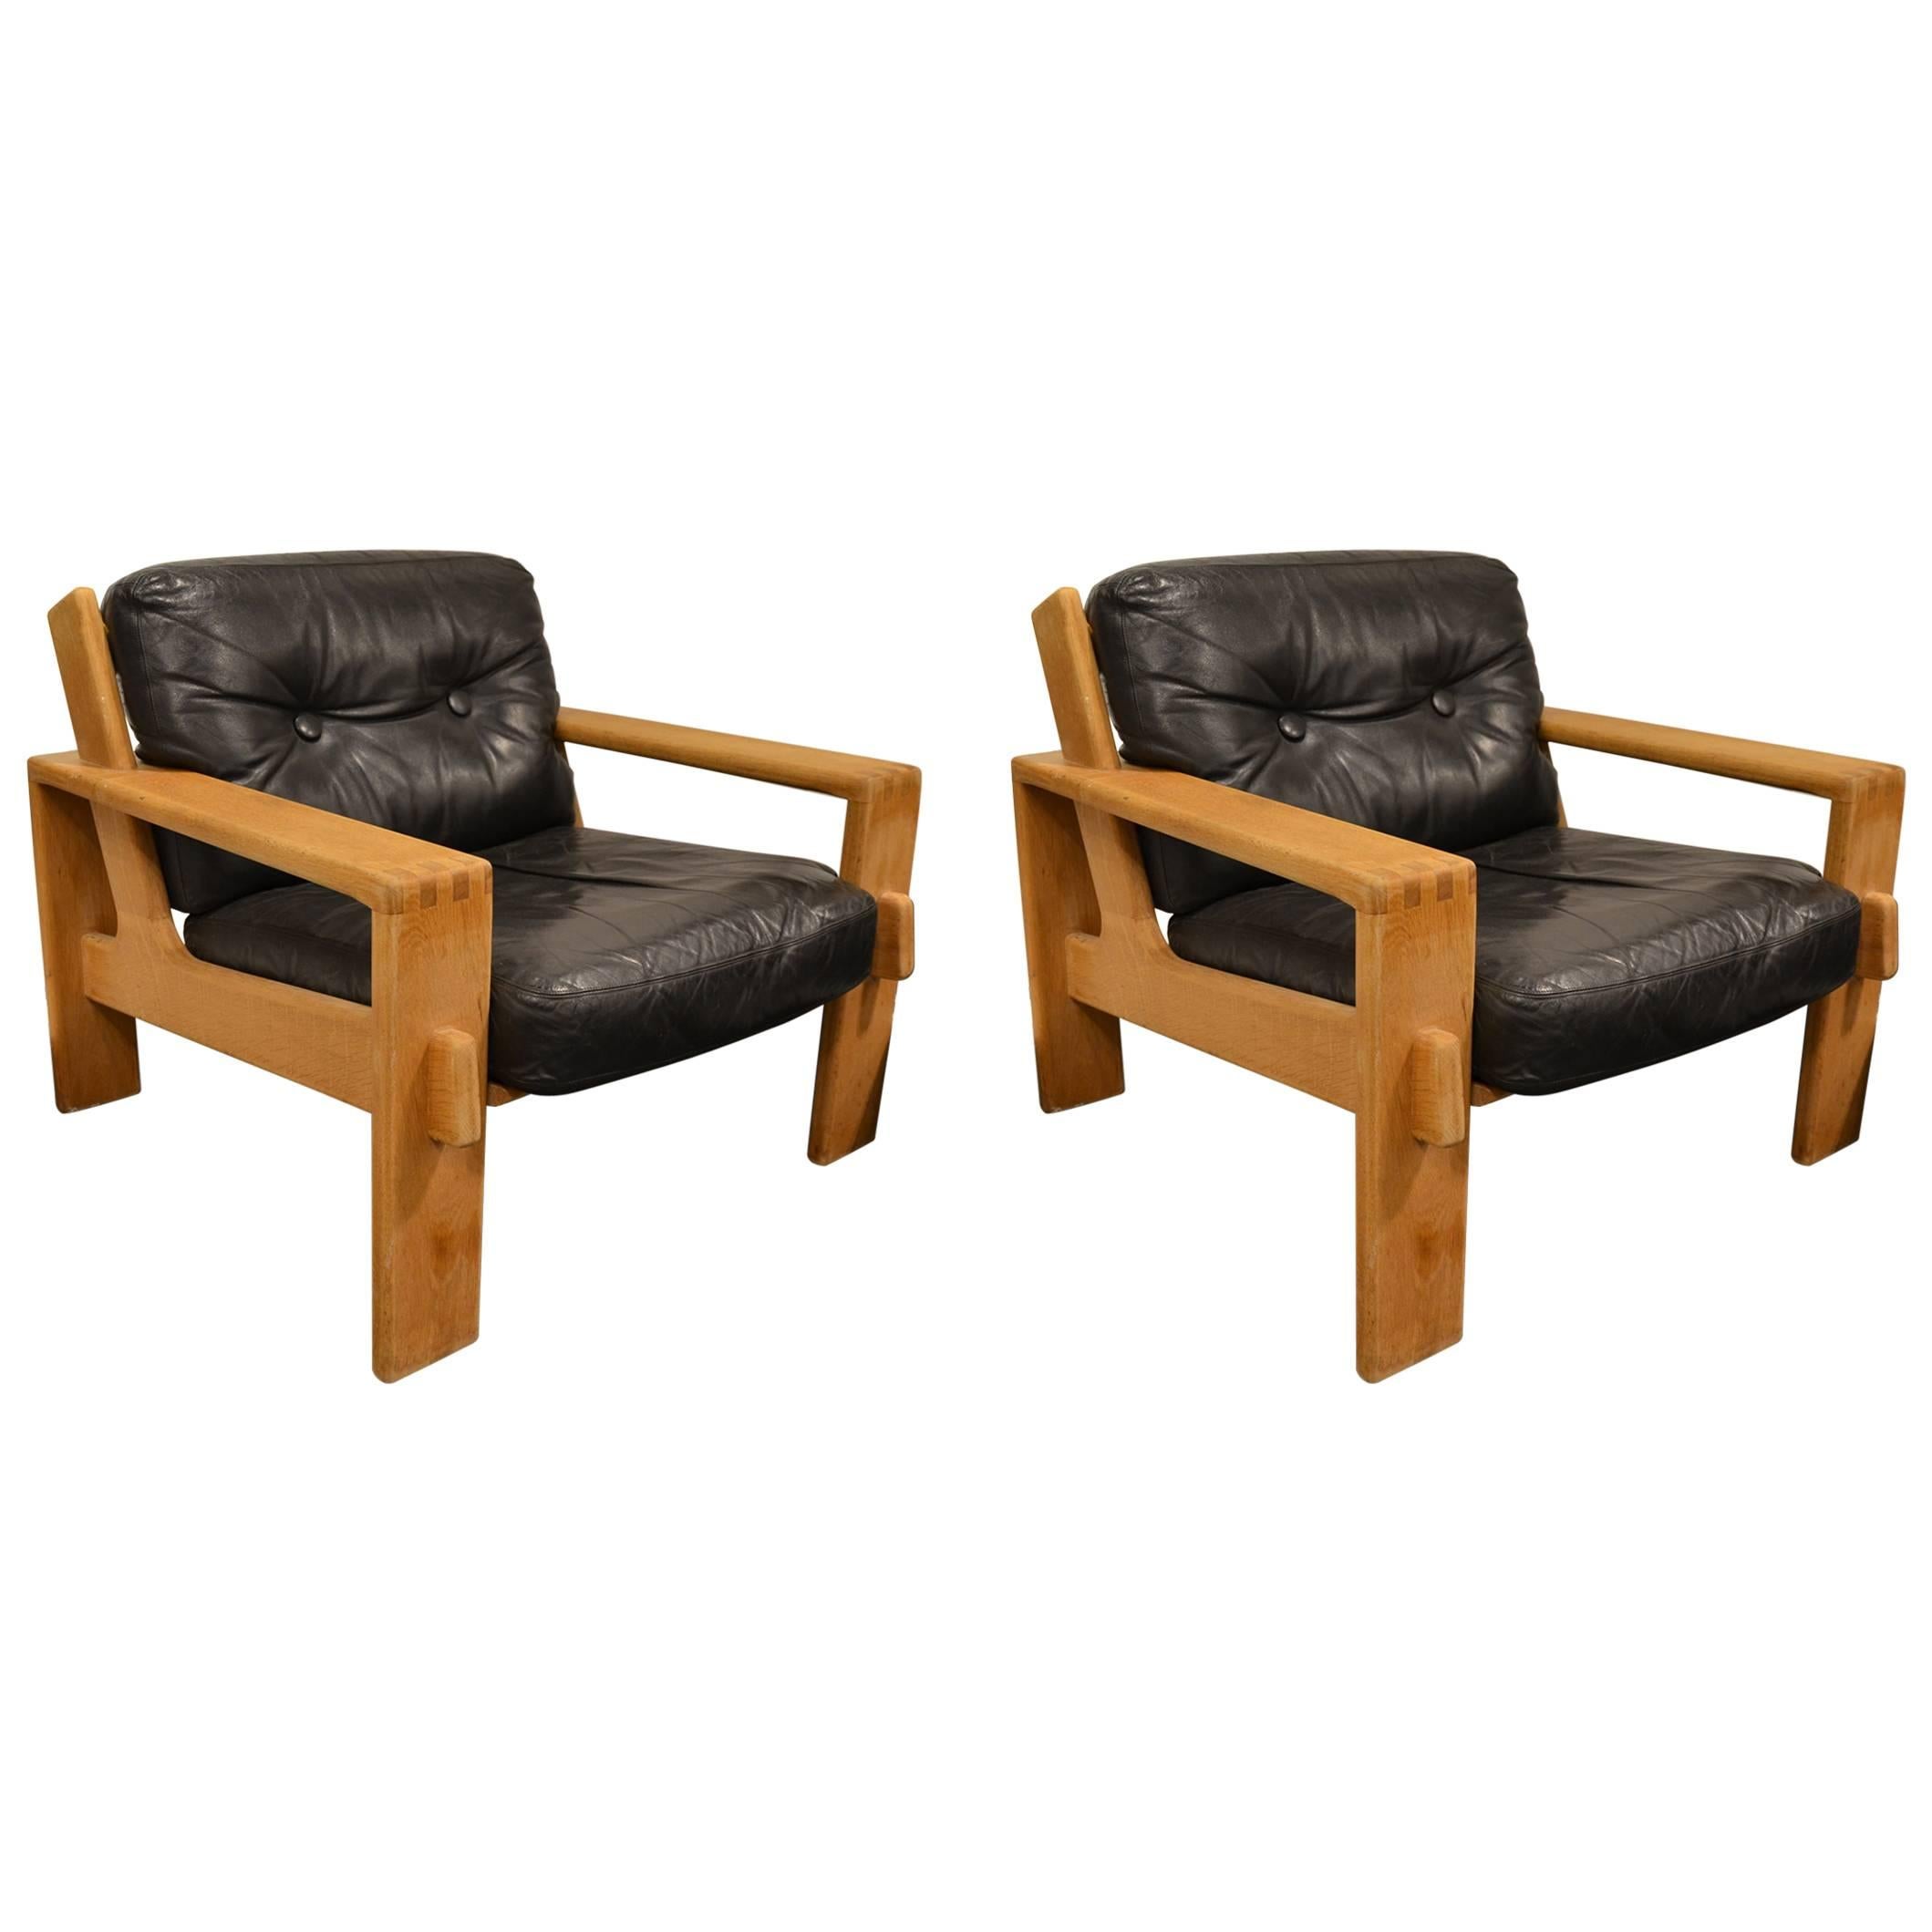 Beautiful Pair of Danish Armchairs designed by Borge Morgensen, circa 1960